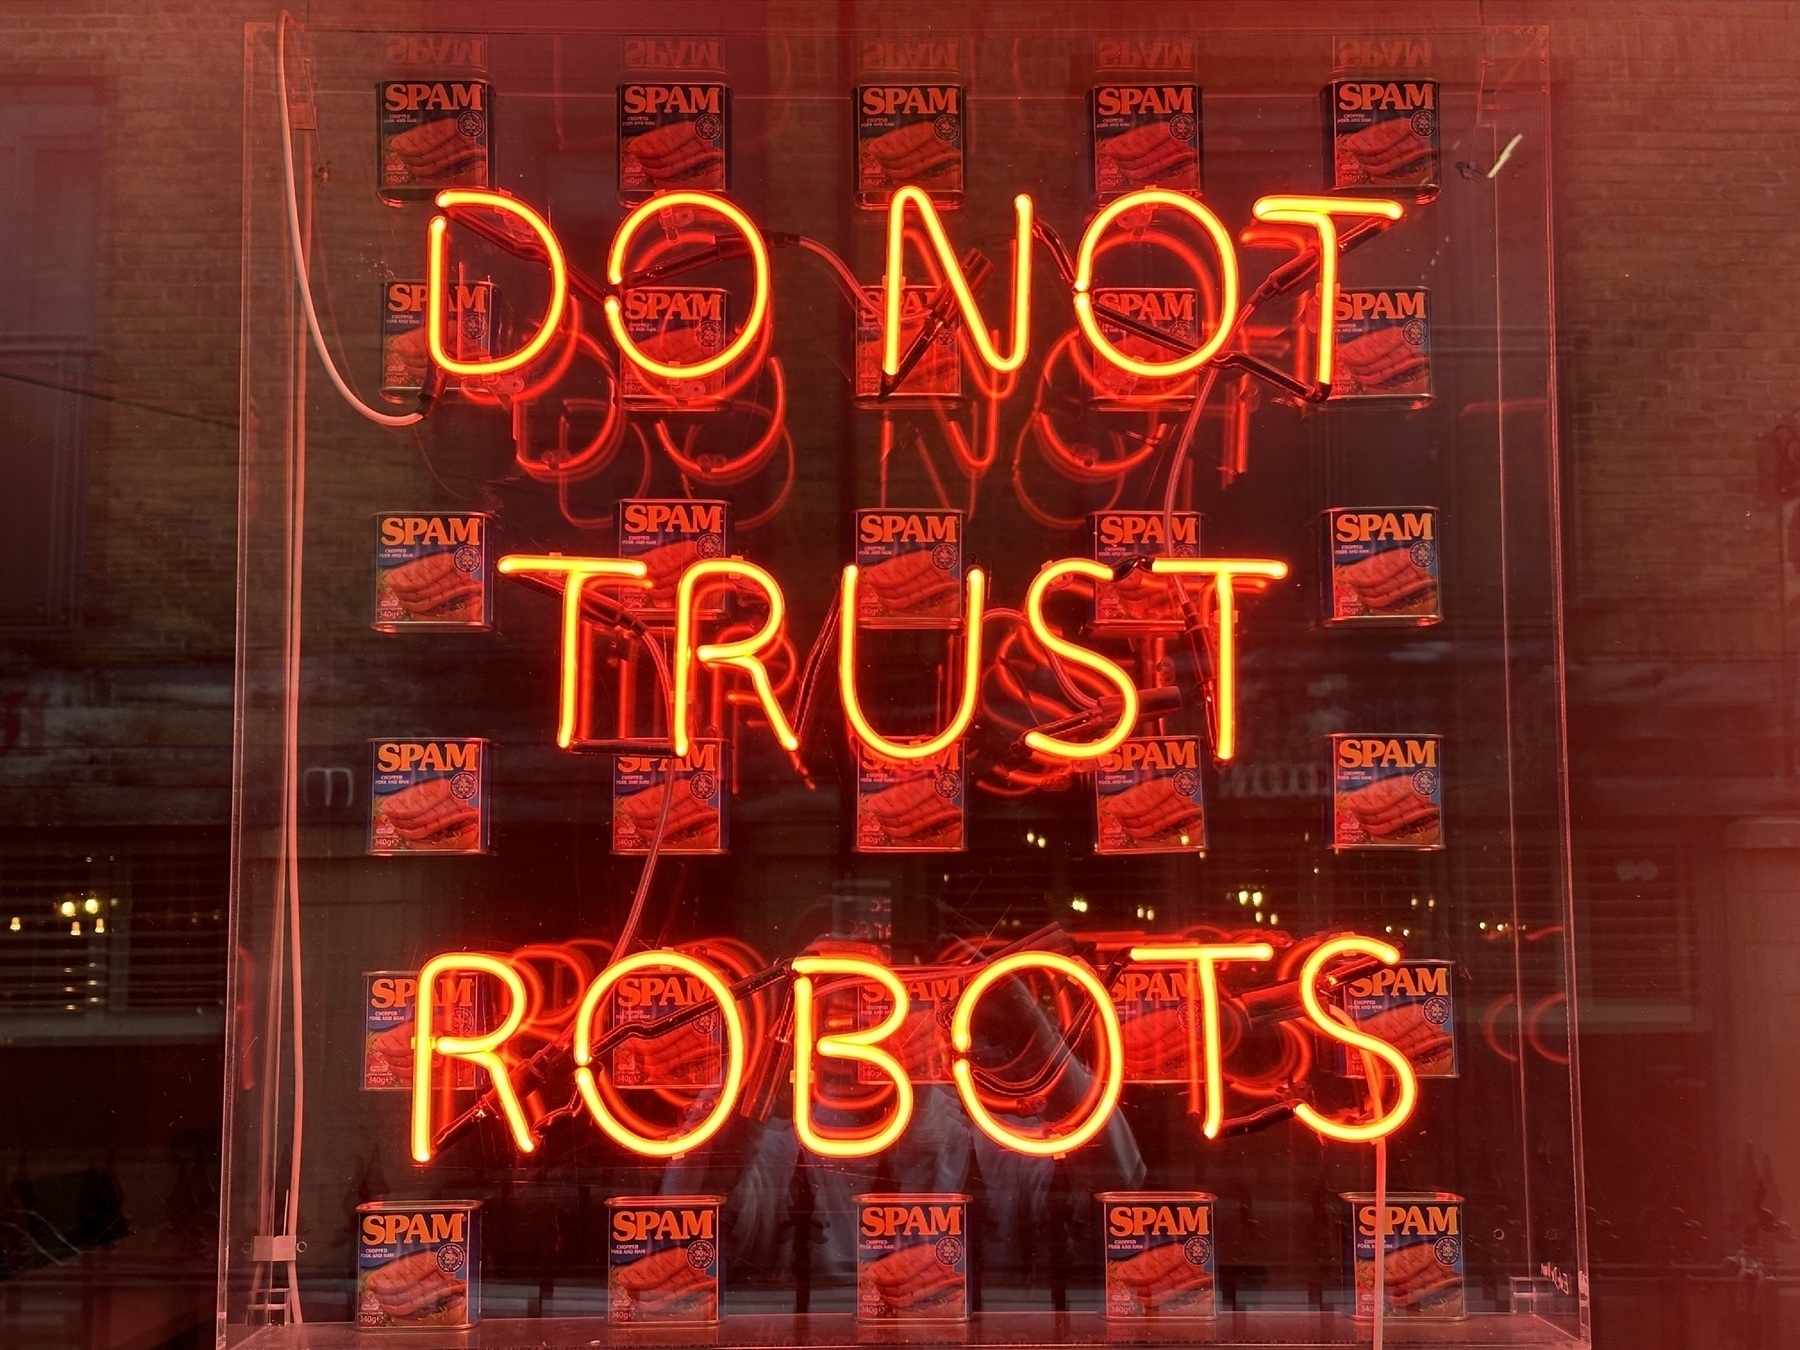 A red neon sign that says DO NOT TRUST ROBOTS, overlaid on a grid of 30 cans of SPAM luncheon meat.